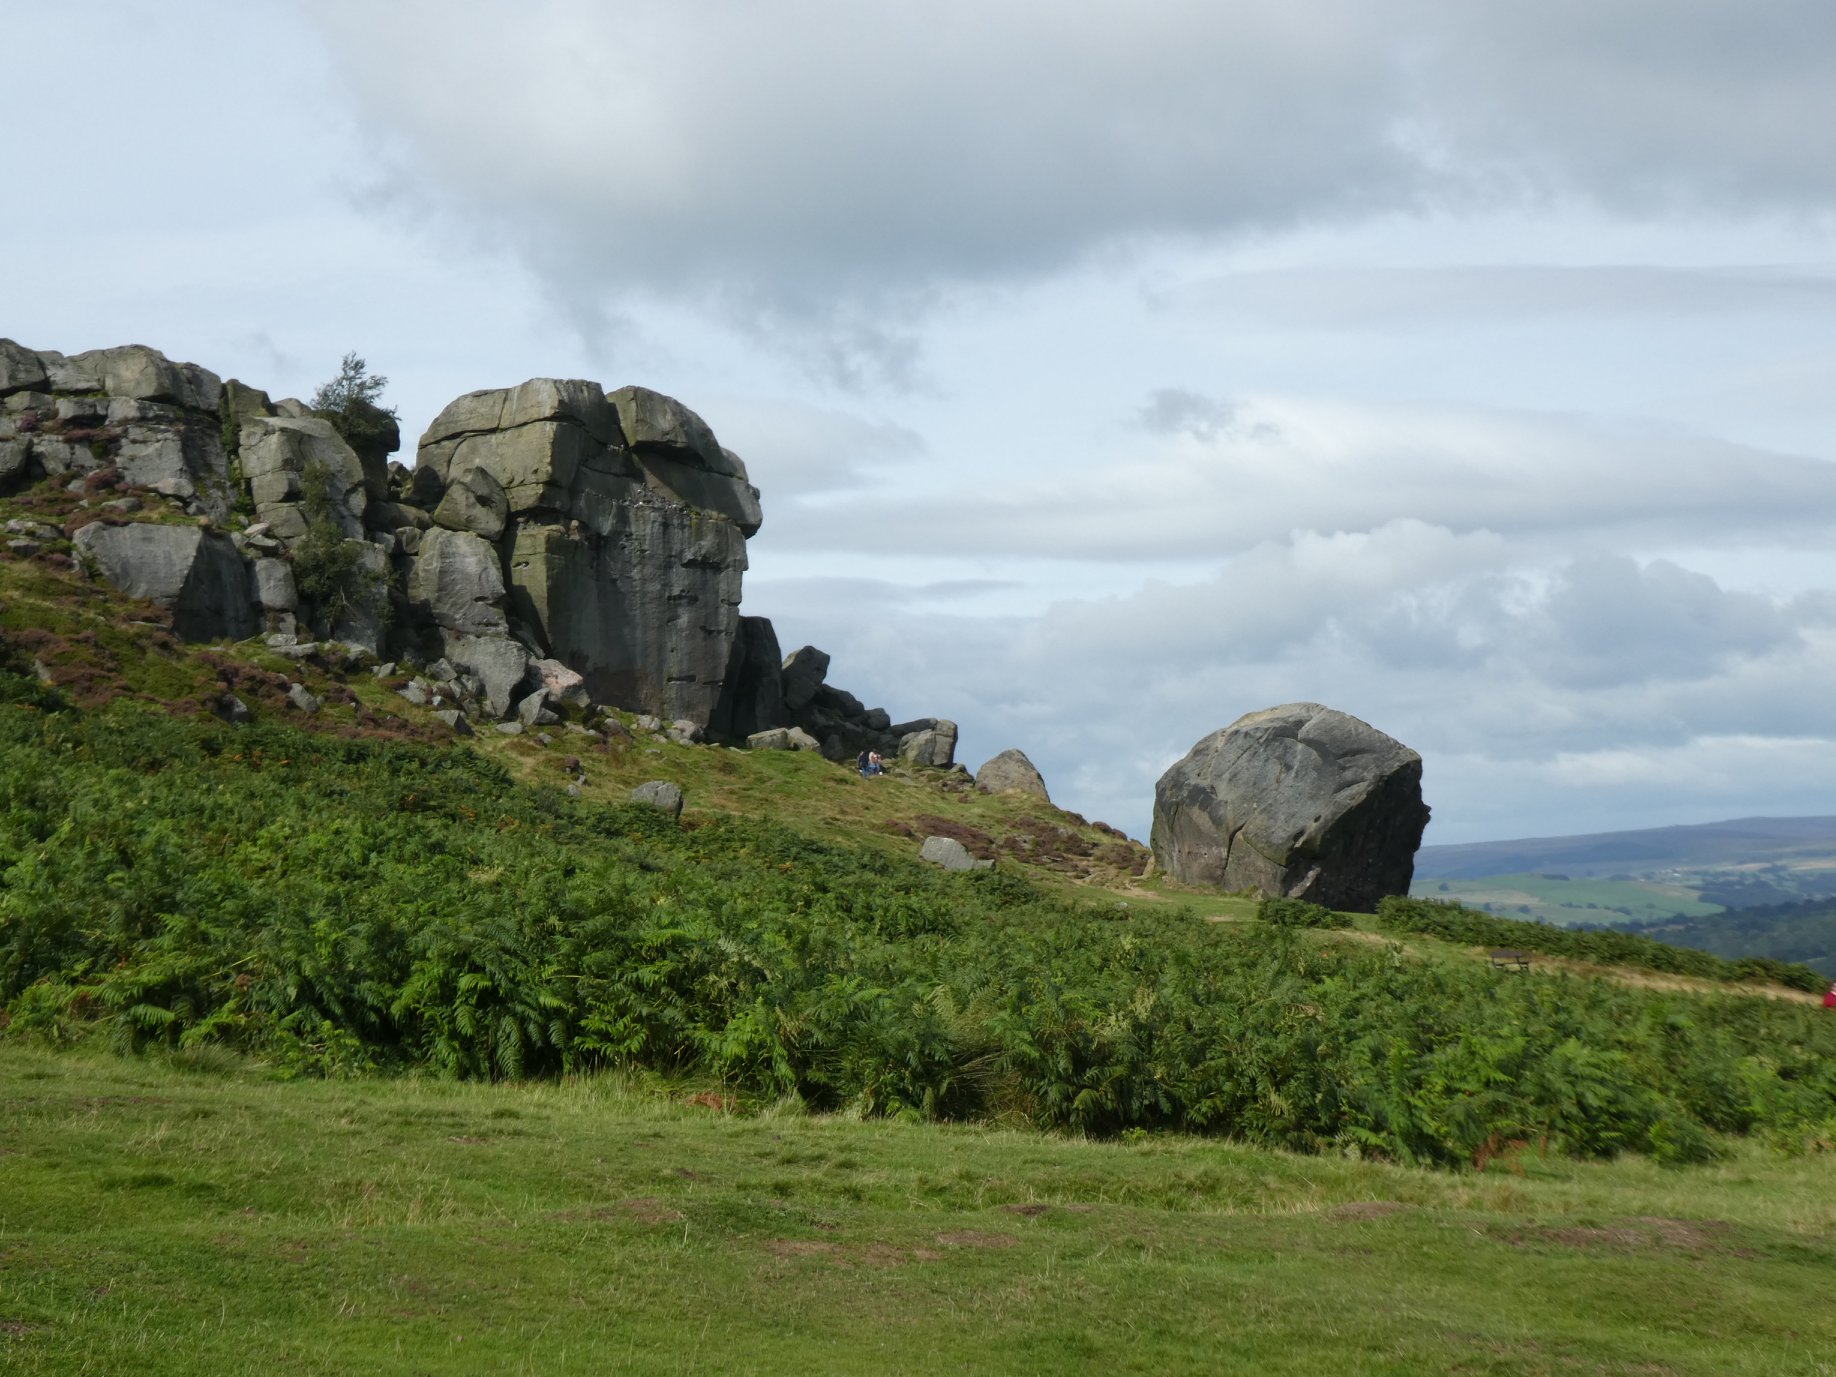 Cow and Calf rocks, Ilkley, by Suzanne Owen